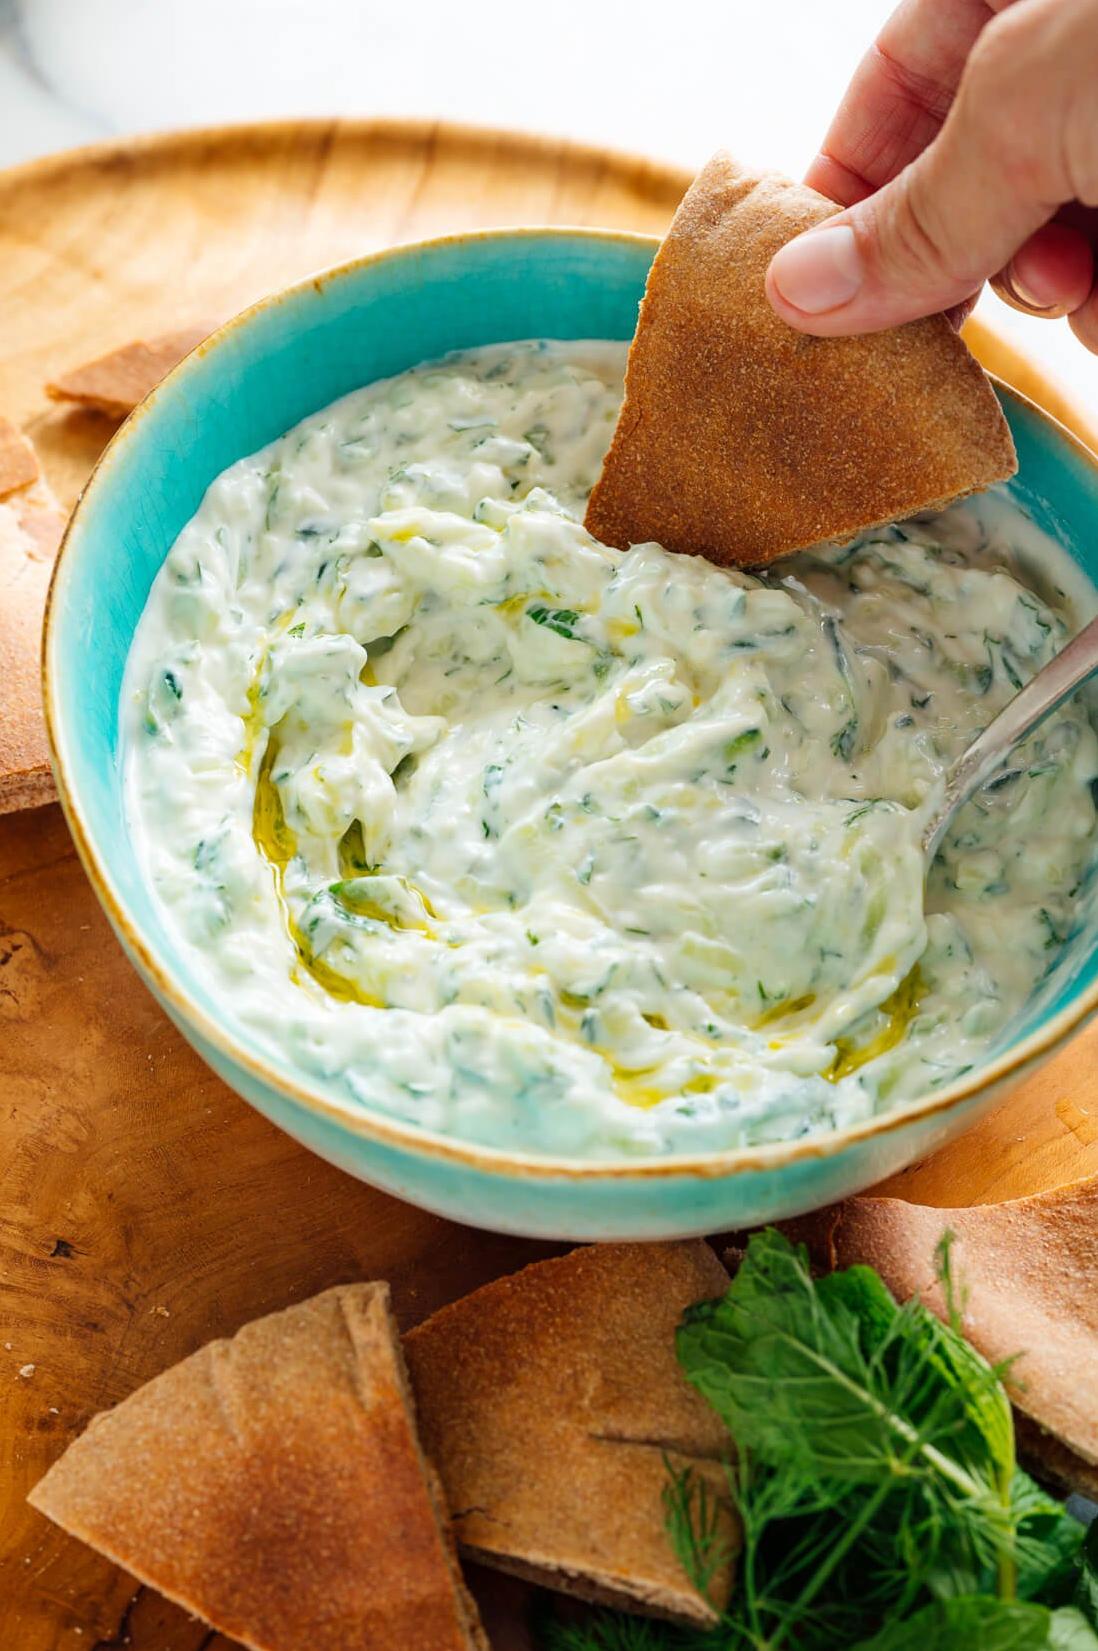  This tangy and creamy sauce is a winner for summer picnics!